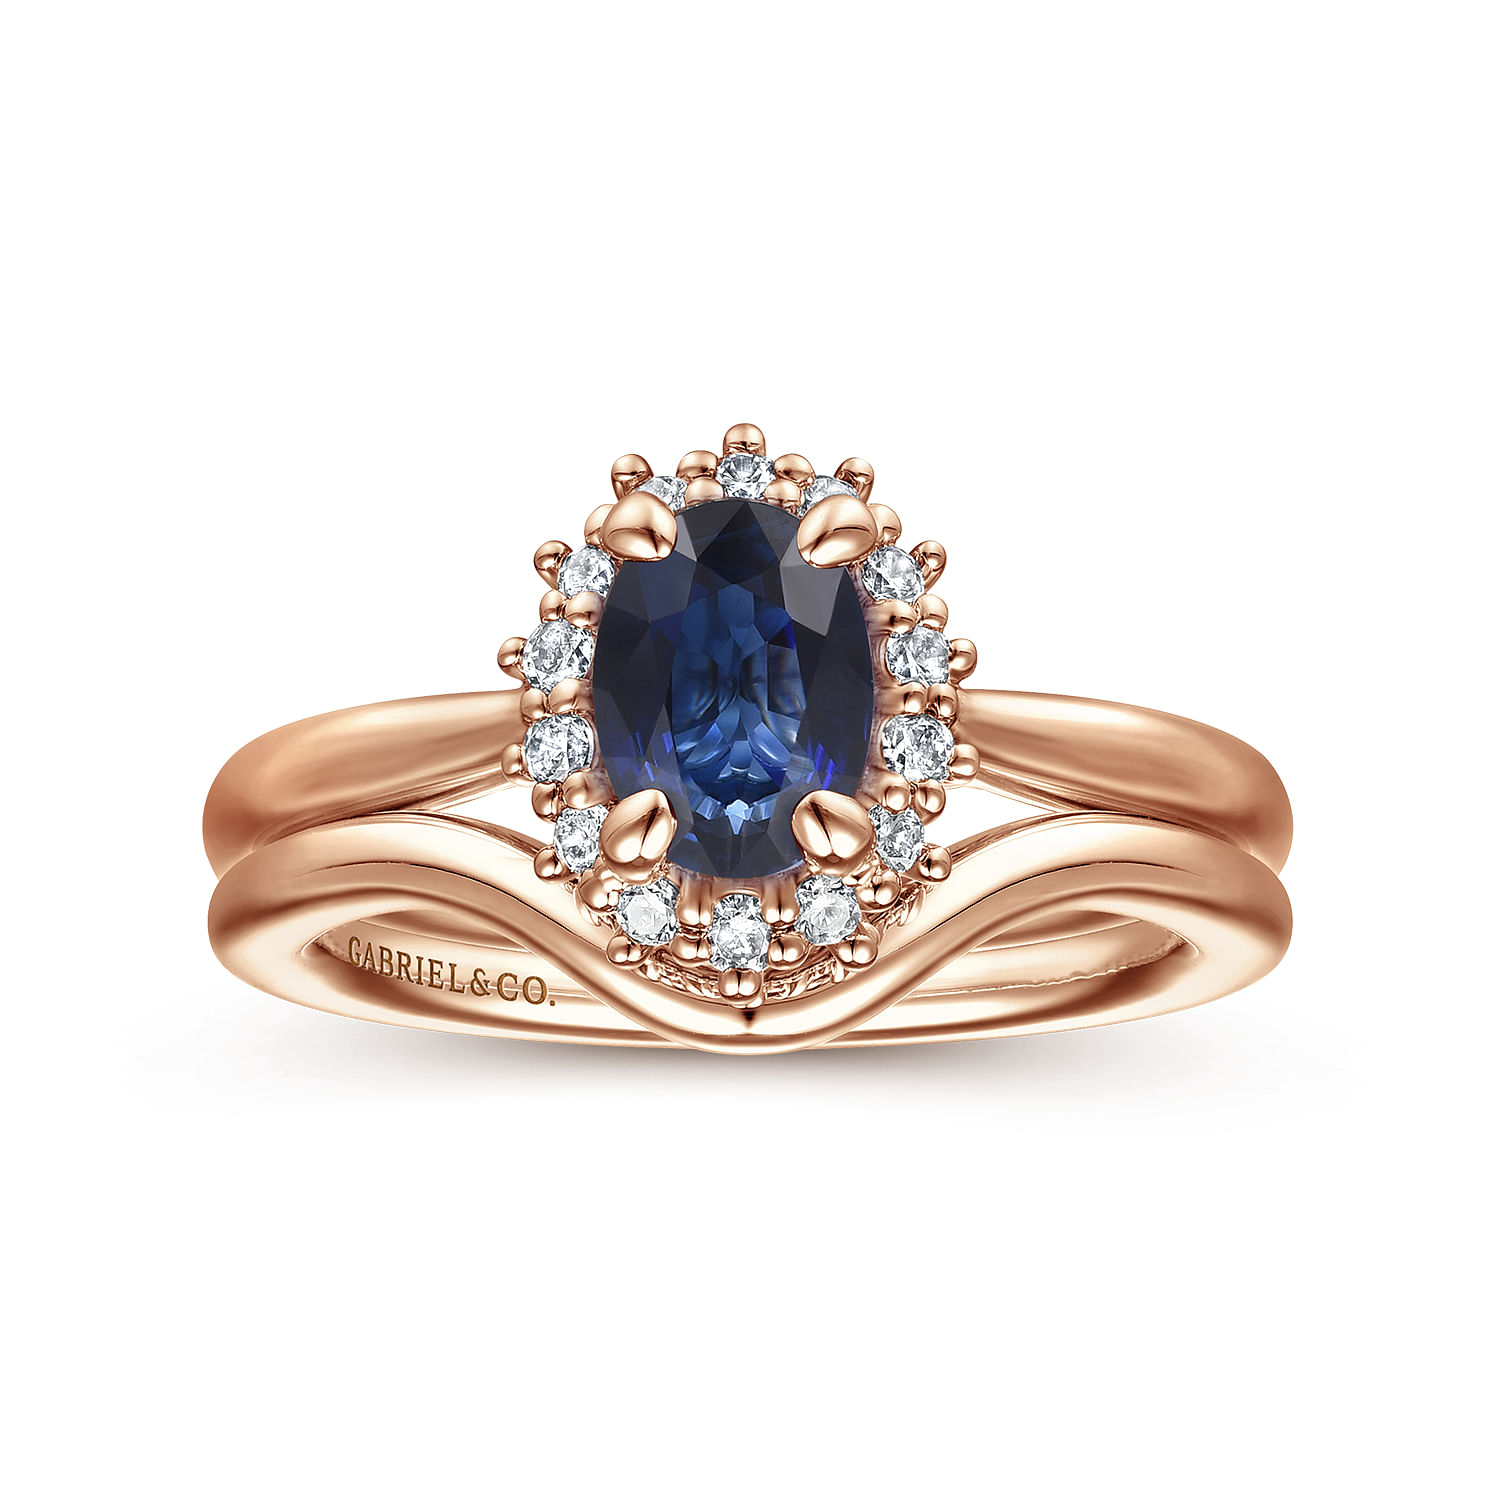 Fergie - 14K Rose Gold Oval Halo Diamond and Sapphire Engagement Ring - 0.17 ct - Shot 4